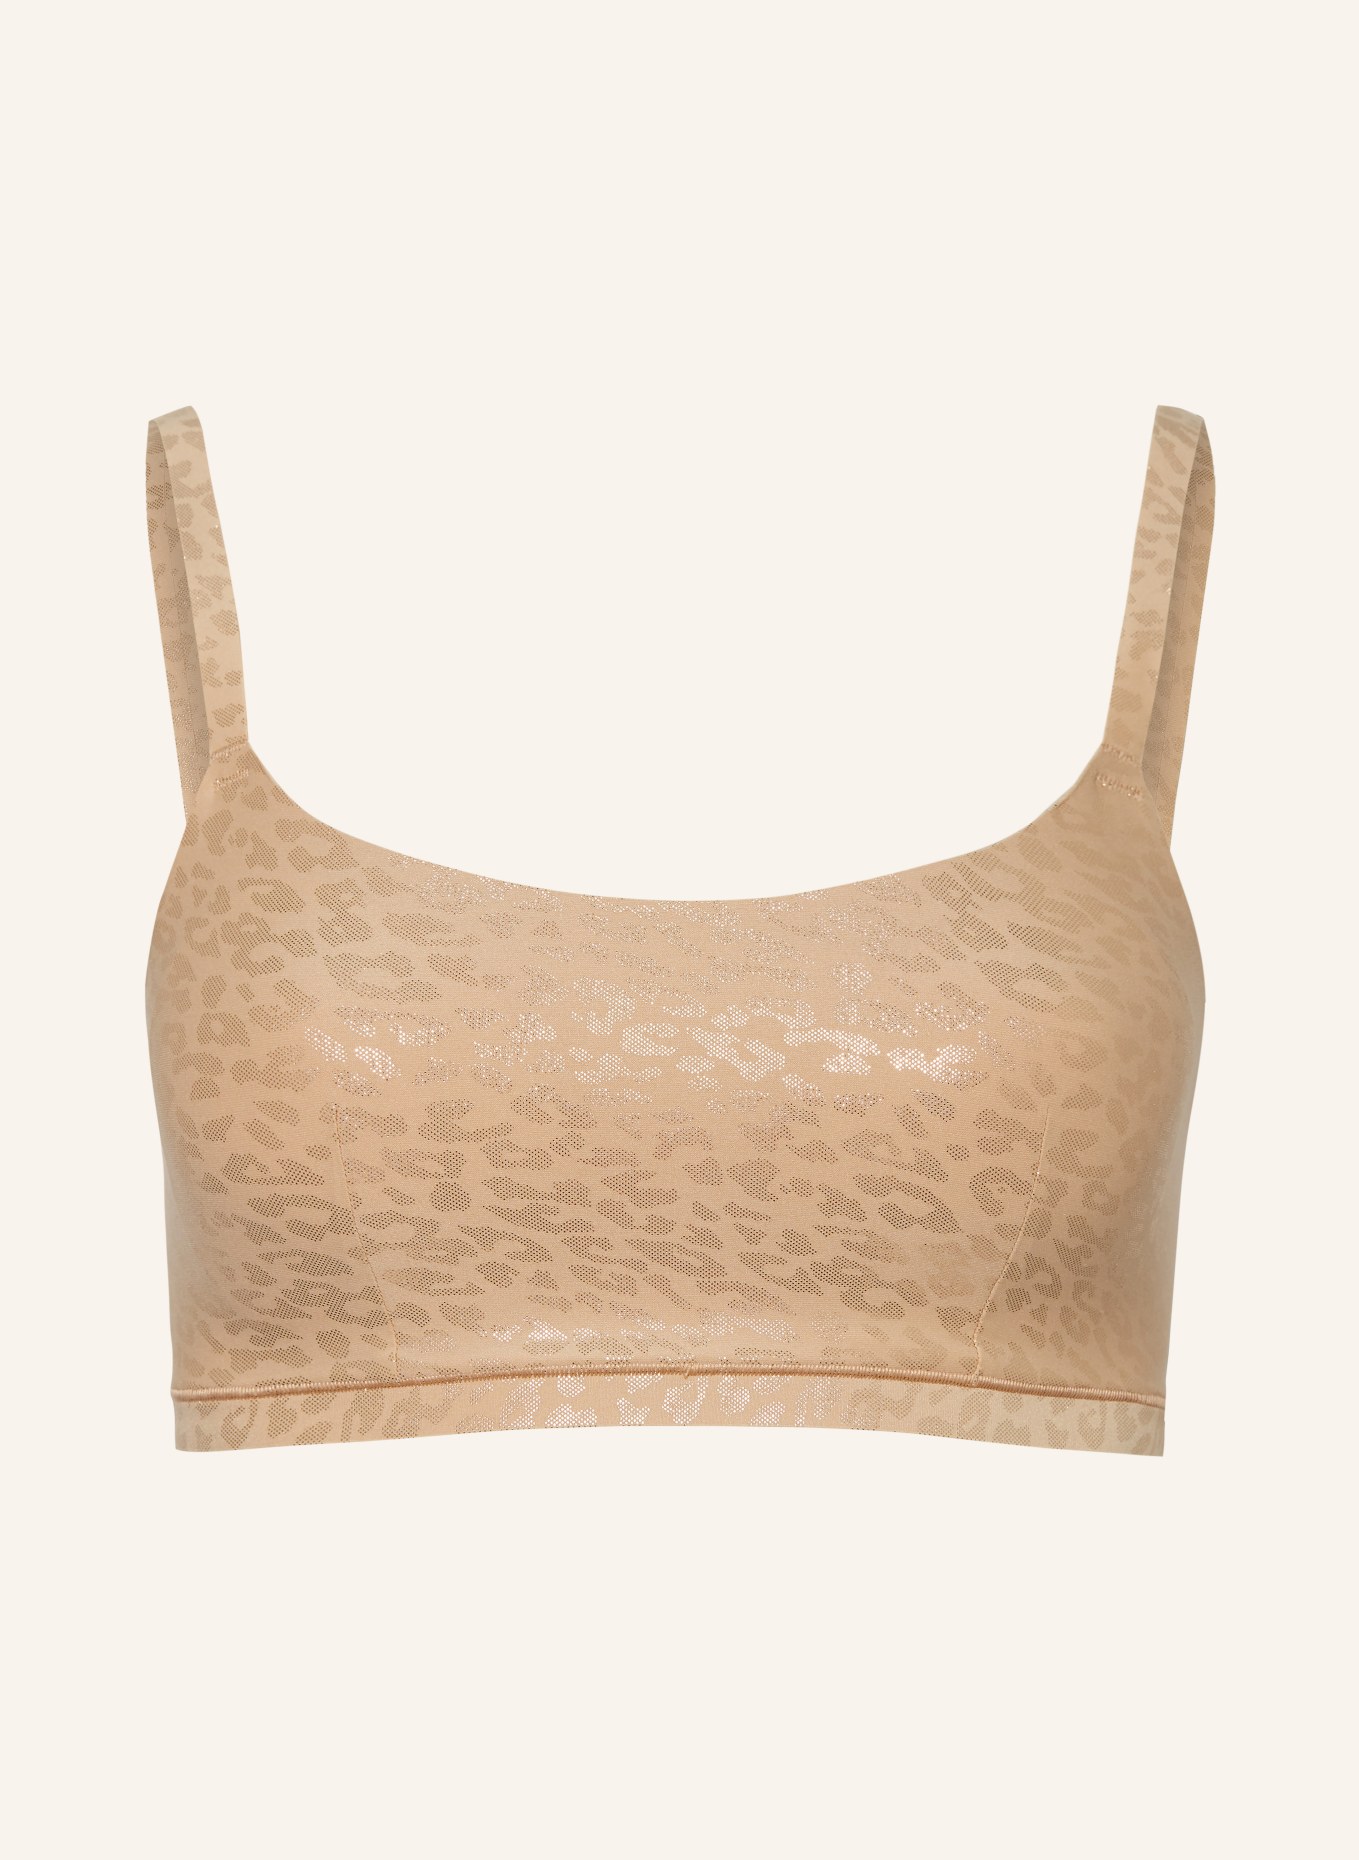 CHANTELLE Bustier SOFTSTRETCH, Farbe: NUDE/ ROSÉGOLD (Bild 1)